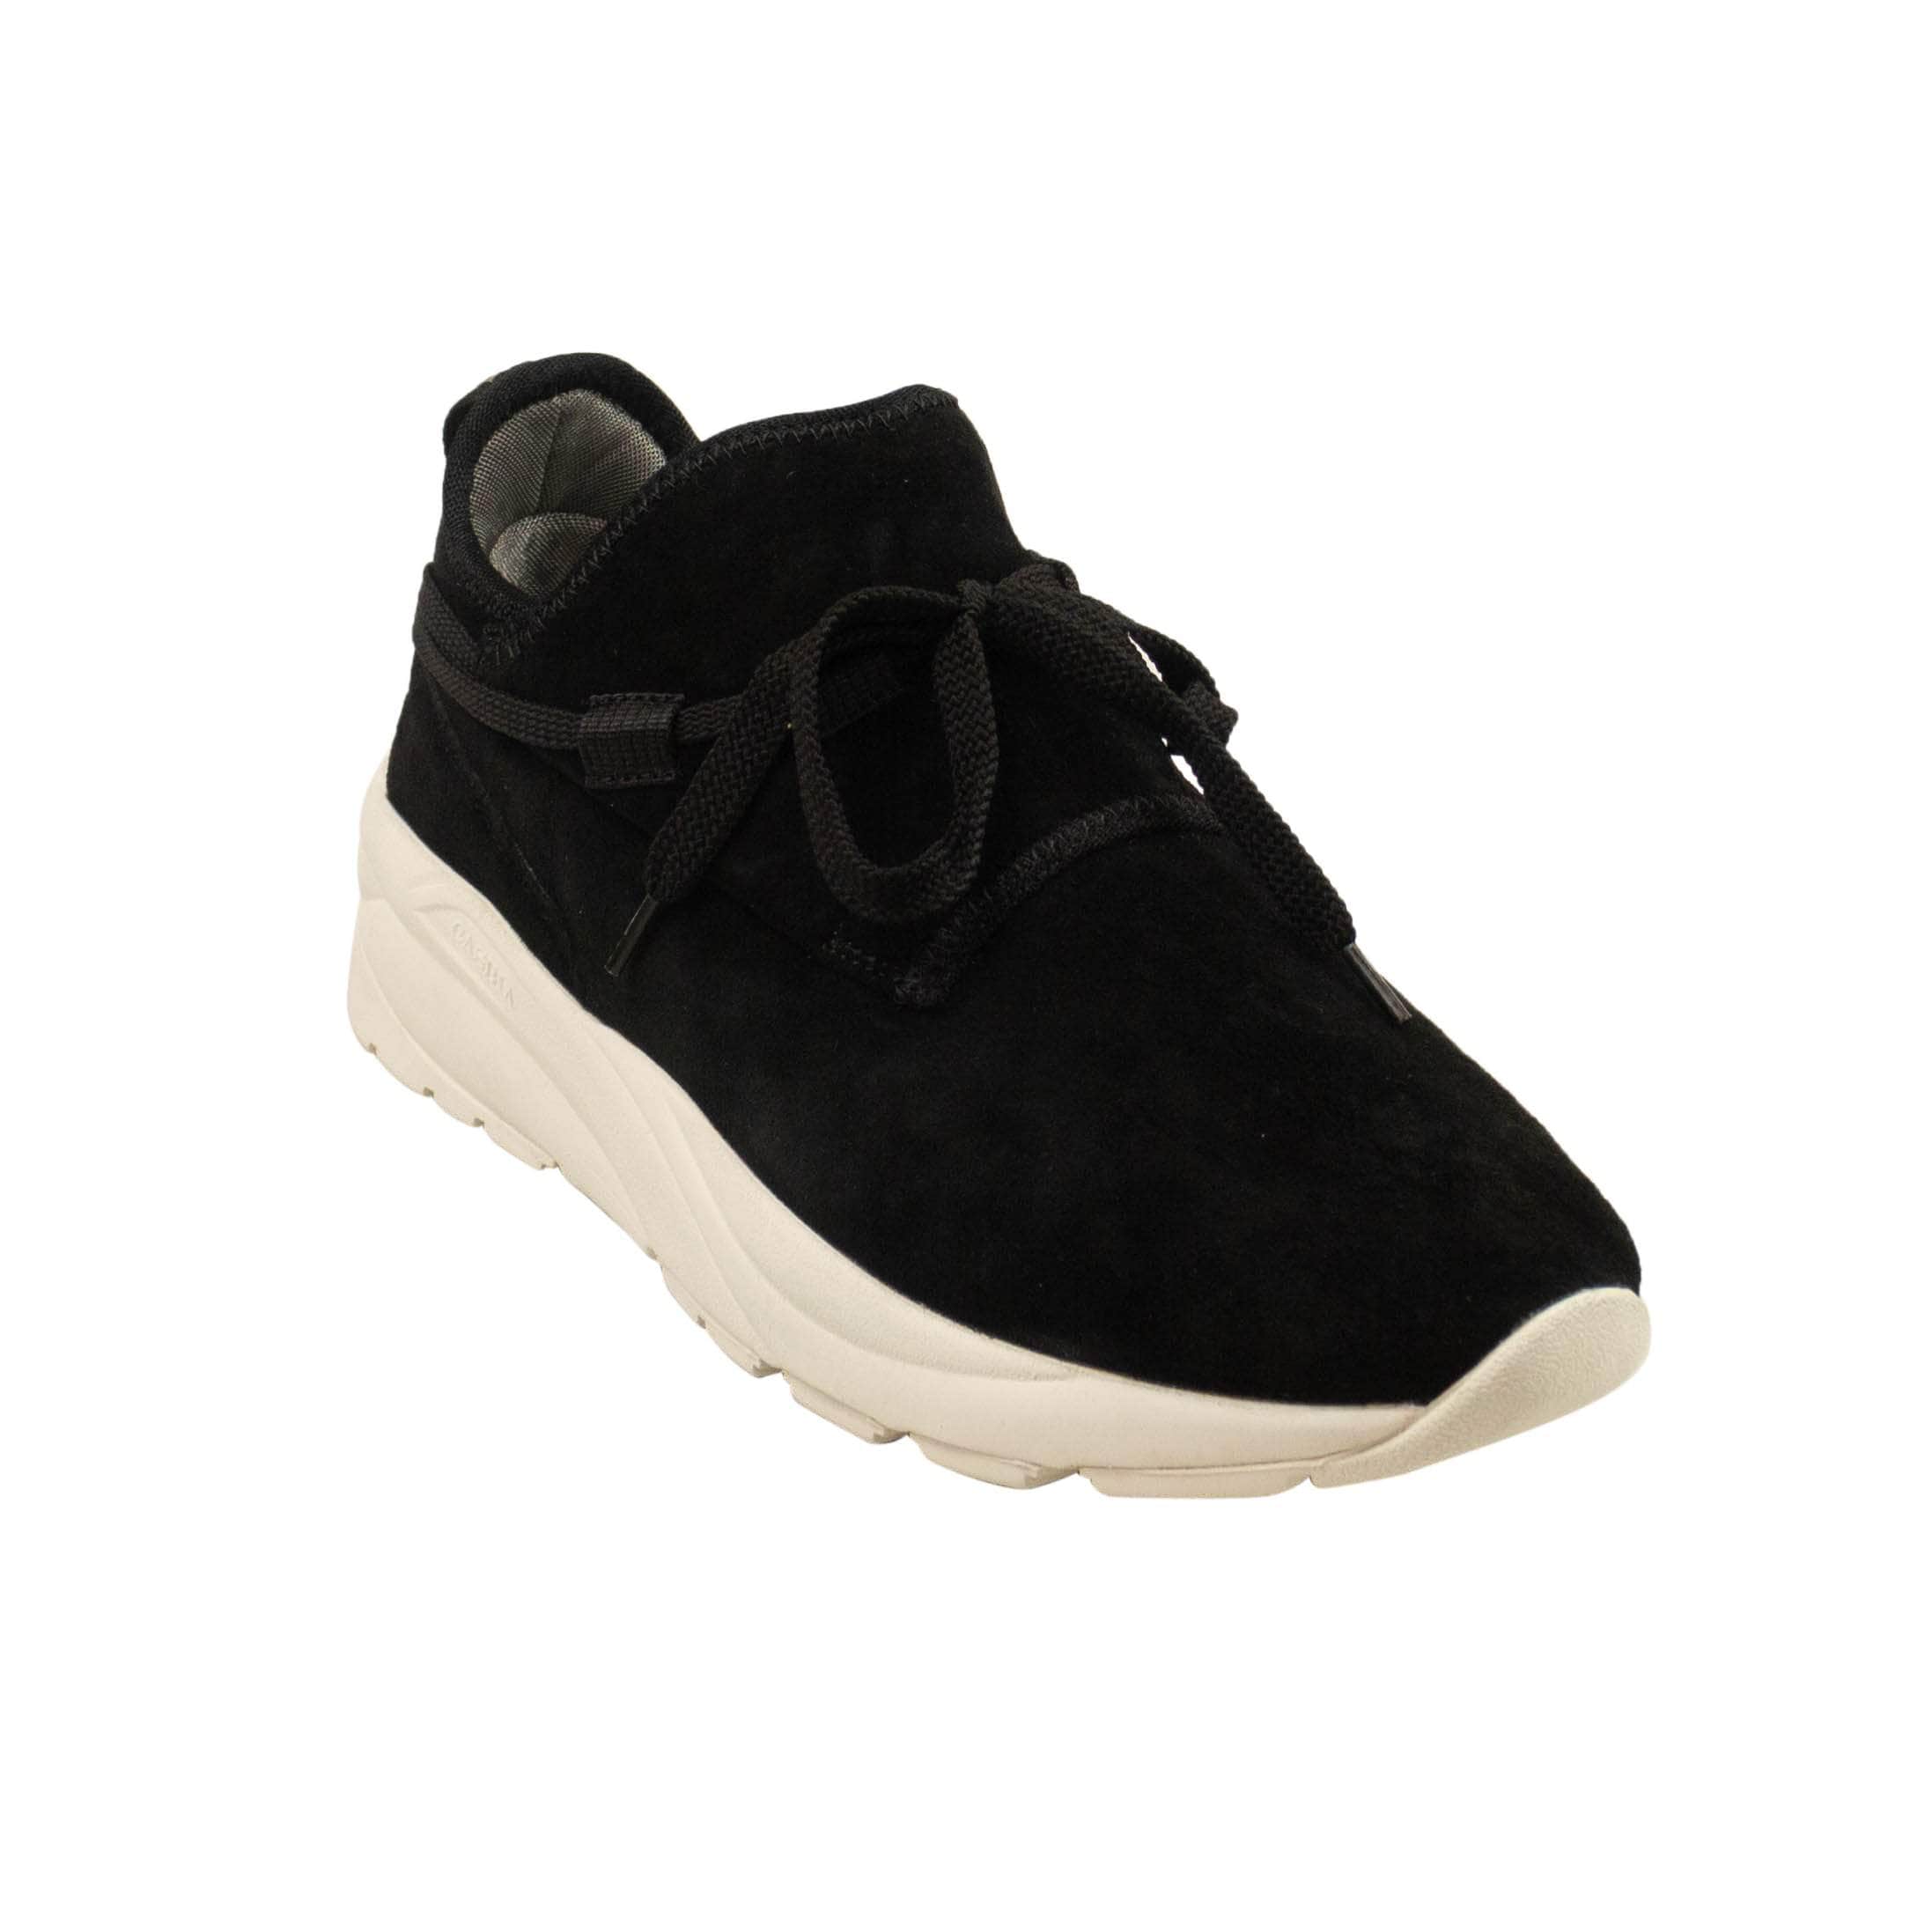 Casbia casbia, channelenable-all, chicmi, couponcollection, gender-mens, main-shoes, mens-shoes, MixedApparel, size-40, size-41, size-42, size-43, size-44, size-45, under-250 Black William Rbt Lace UpSneakers